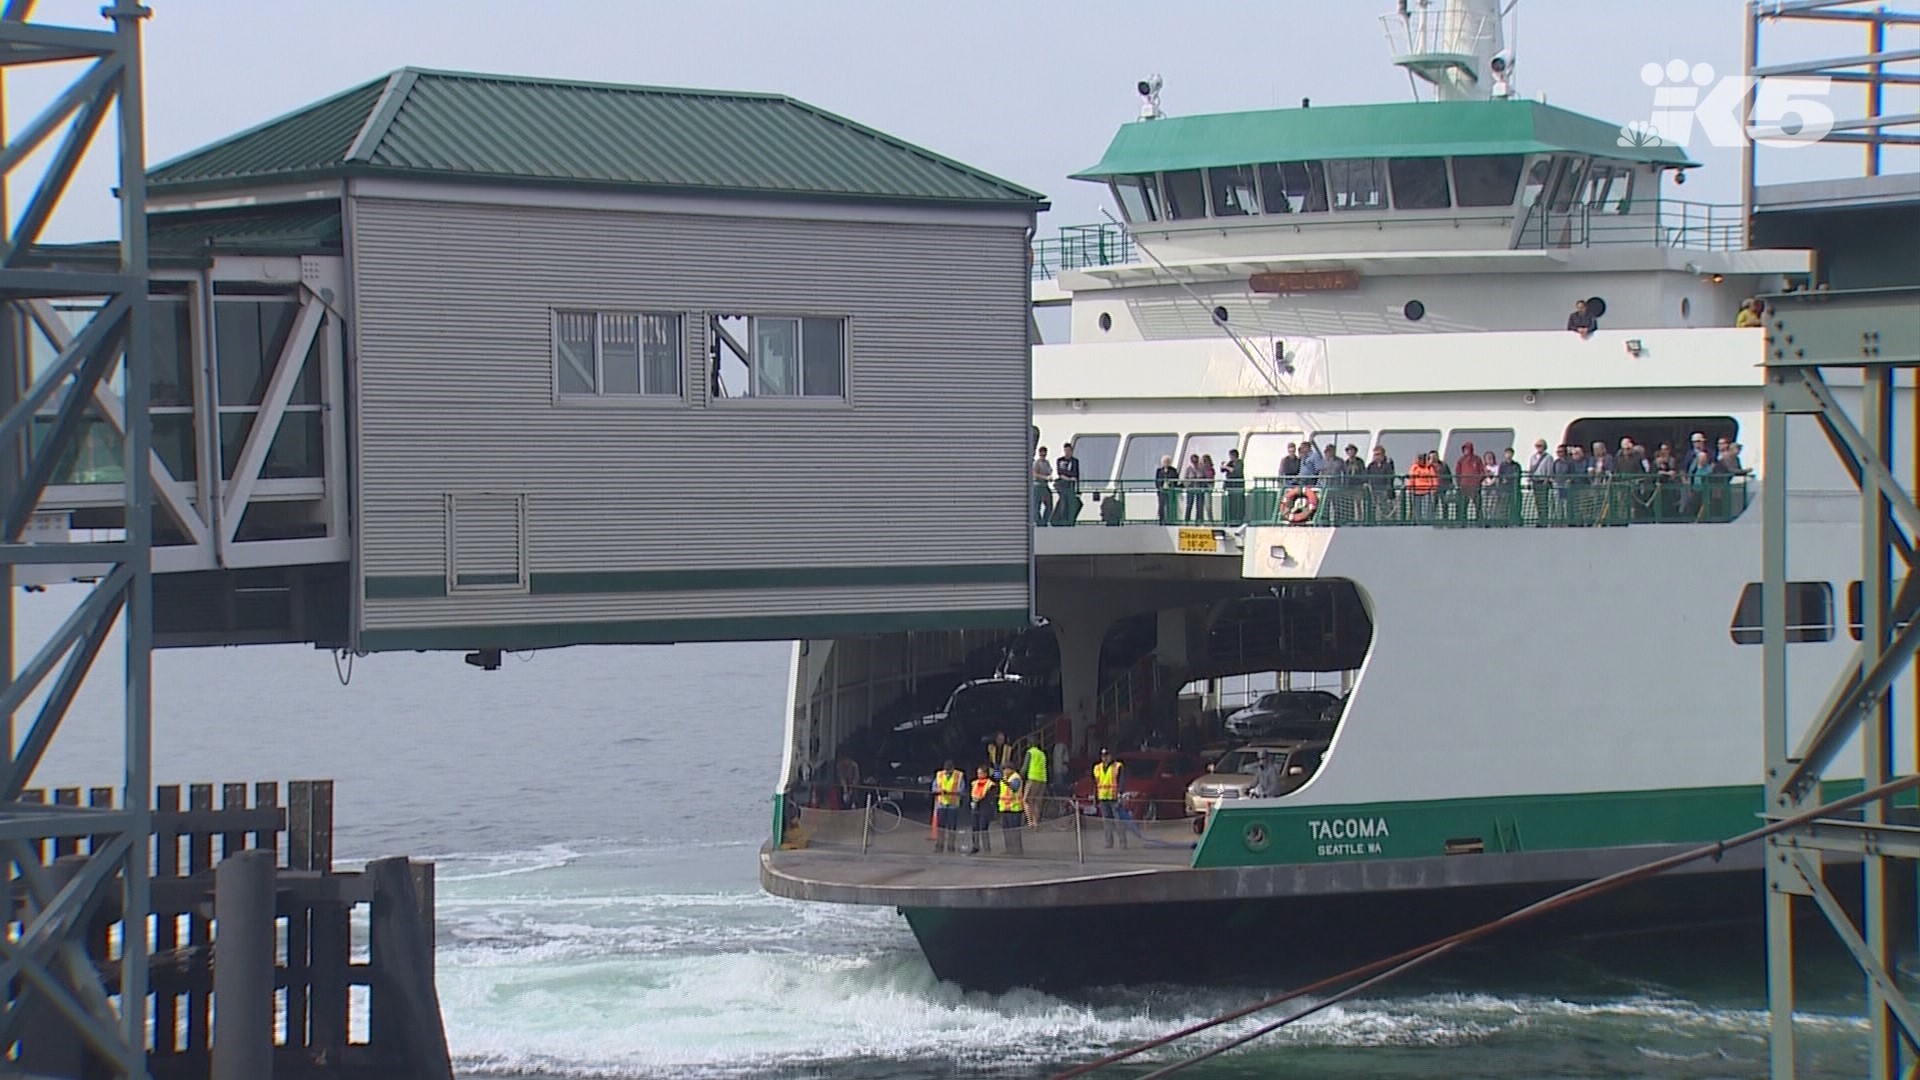 Washington State Ferries suggests early arrival, checking your sailing schedule and taking public transportation to the dock if possible.